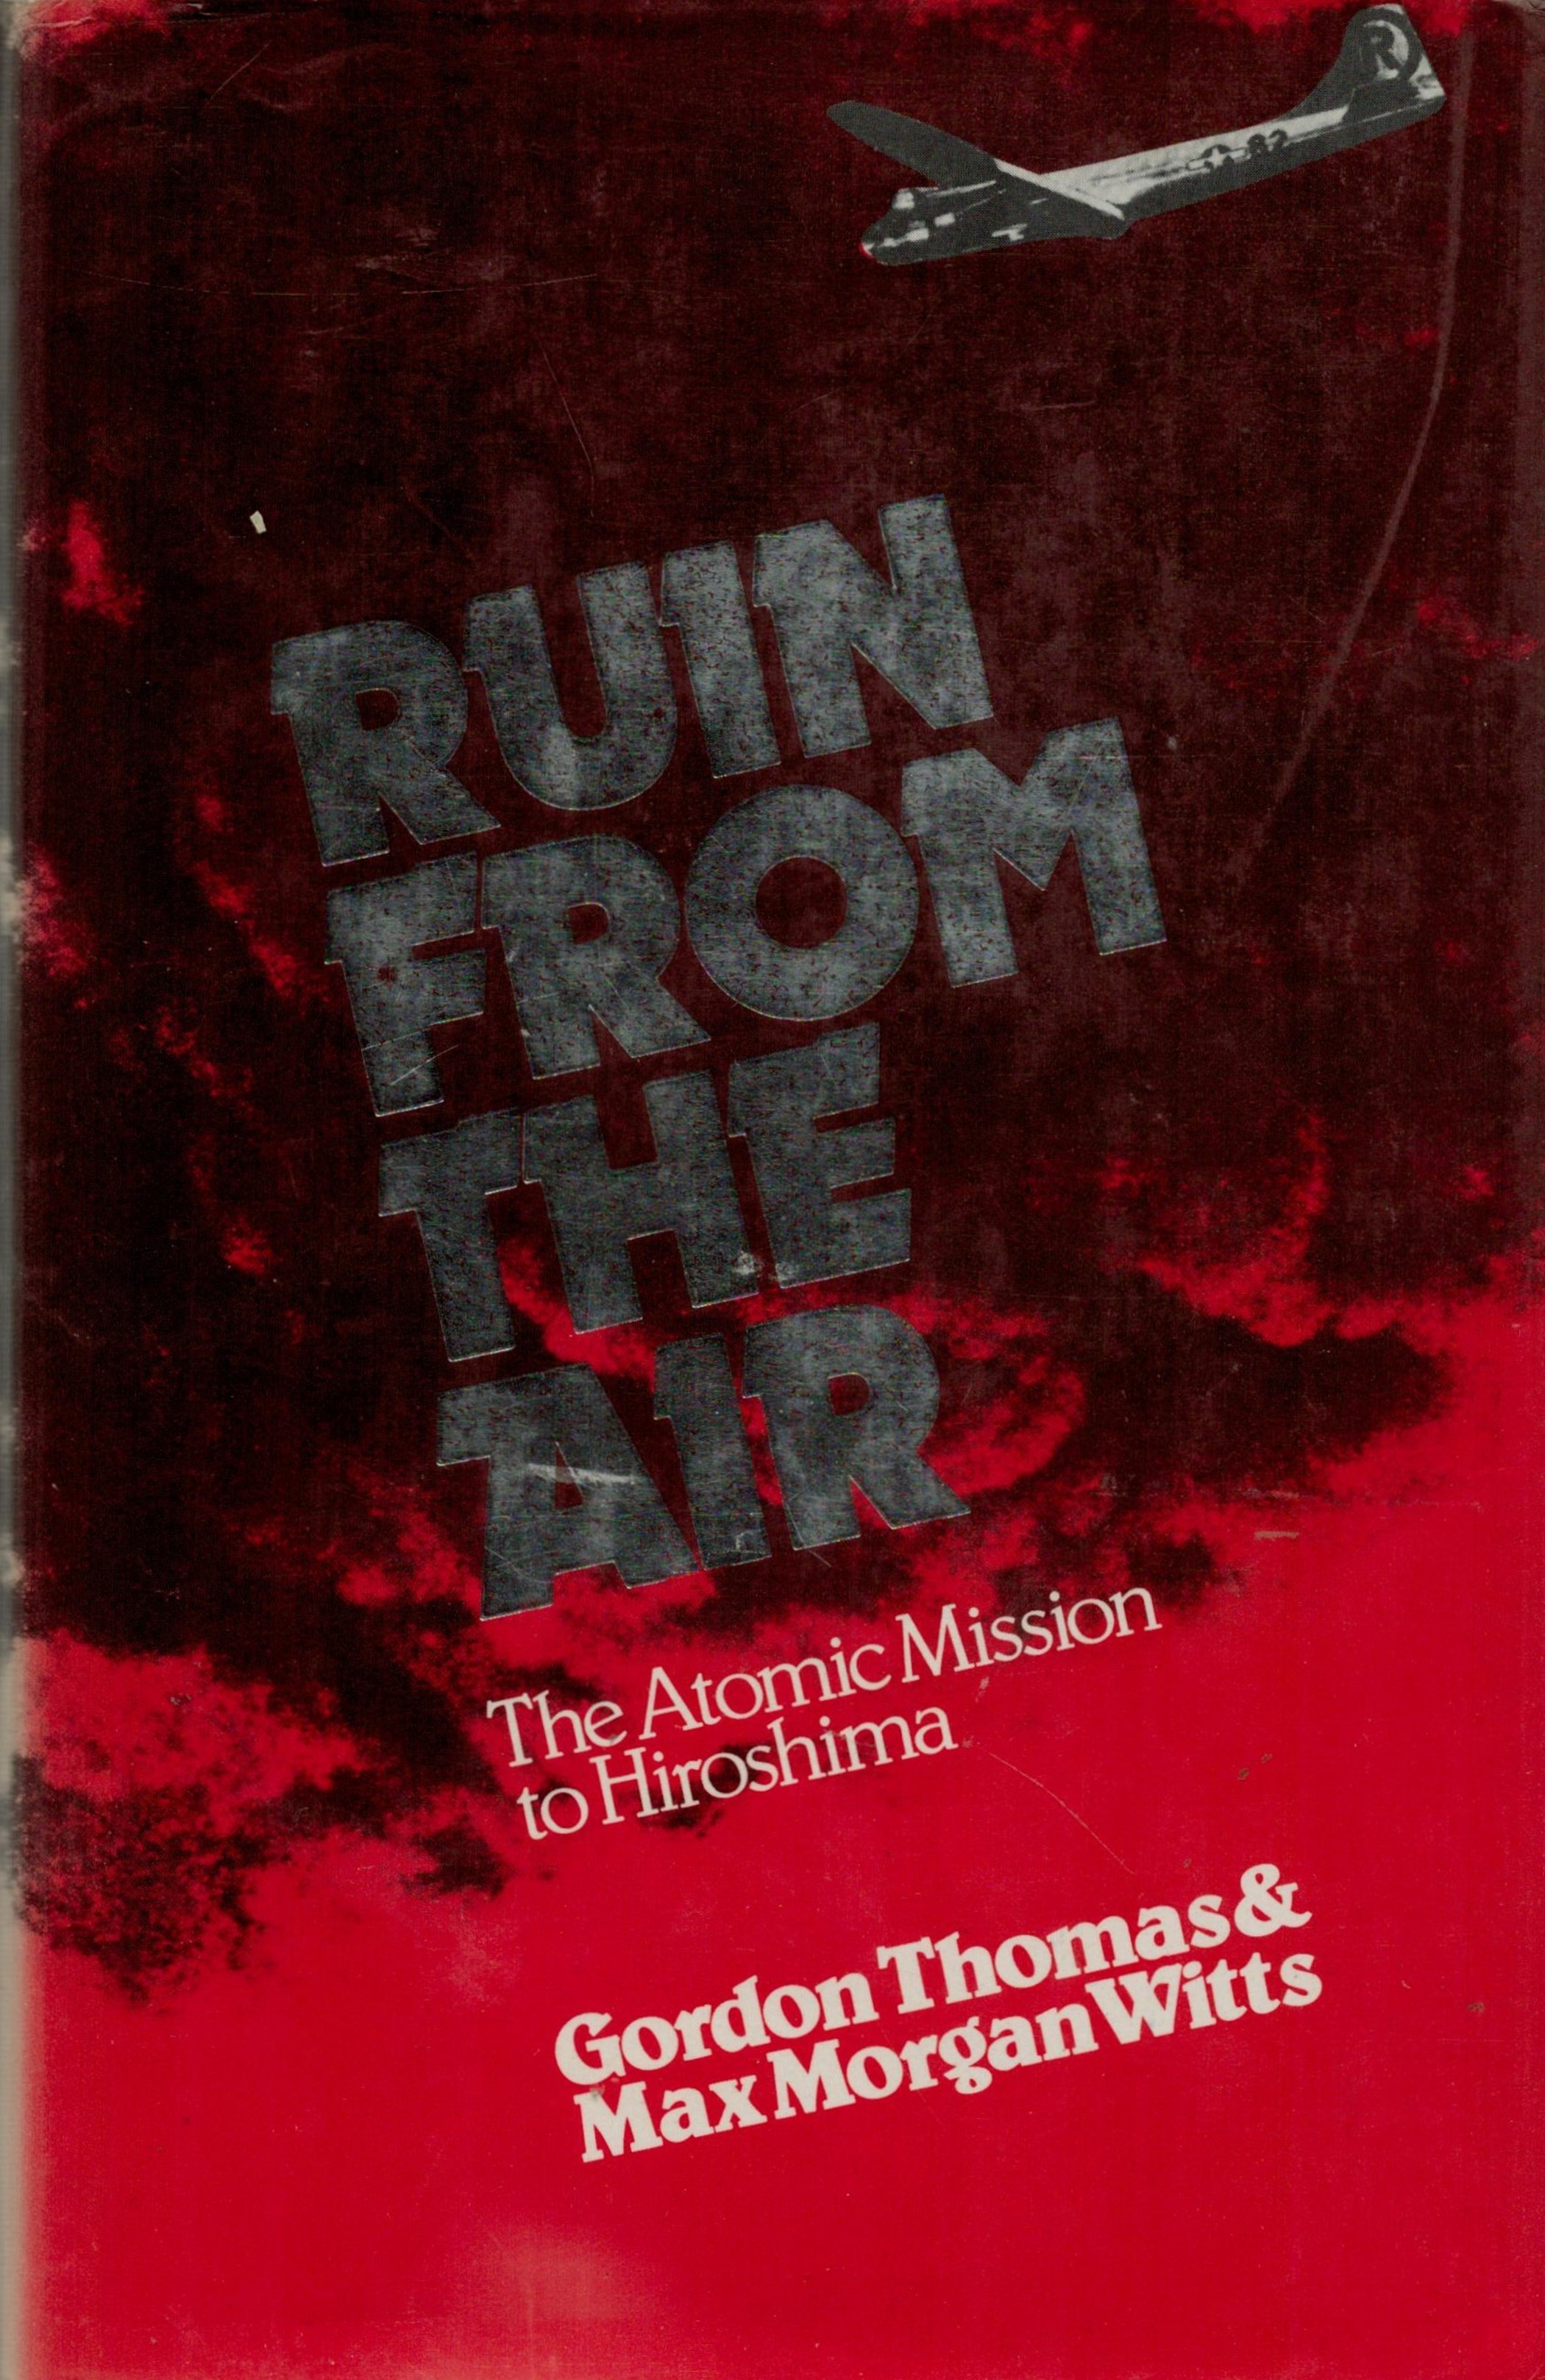 WW2 Ruin from the Air: The Atomic Mission to Hiroshima by Gordon Thomas and Max Morgan Witts. Signed